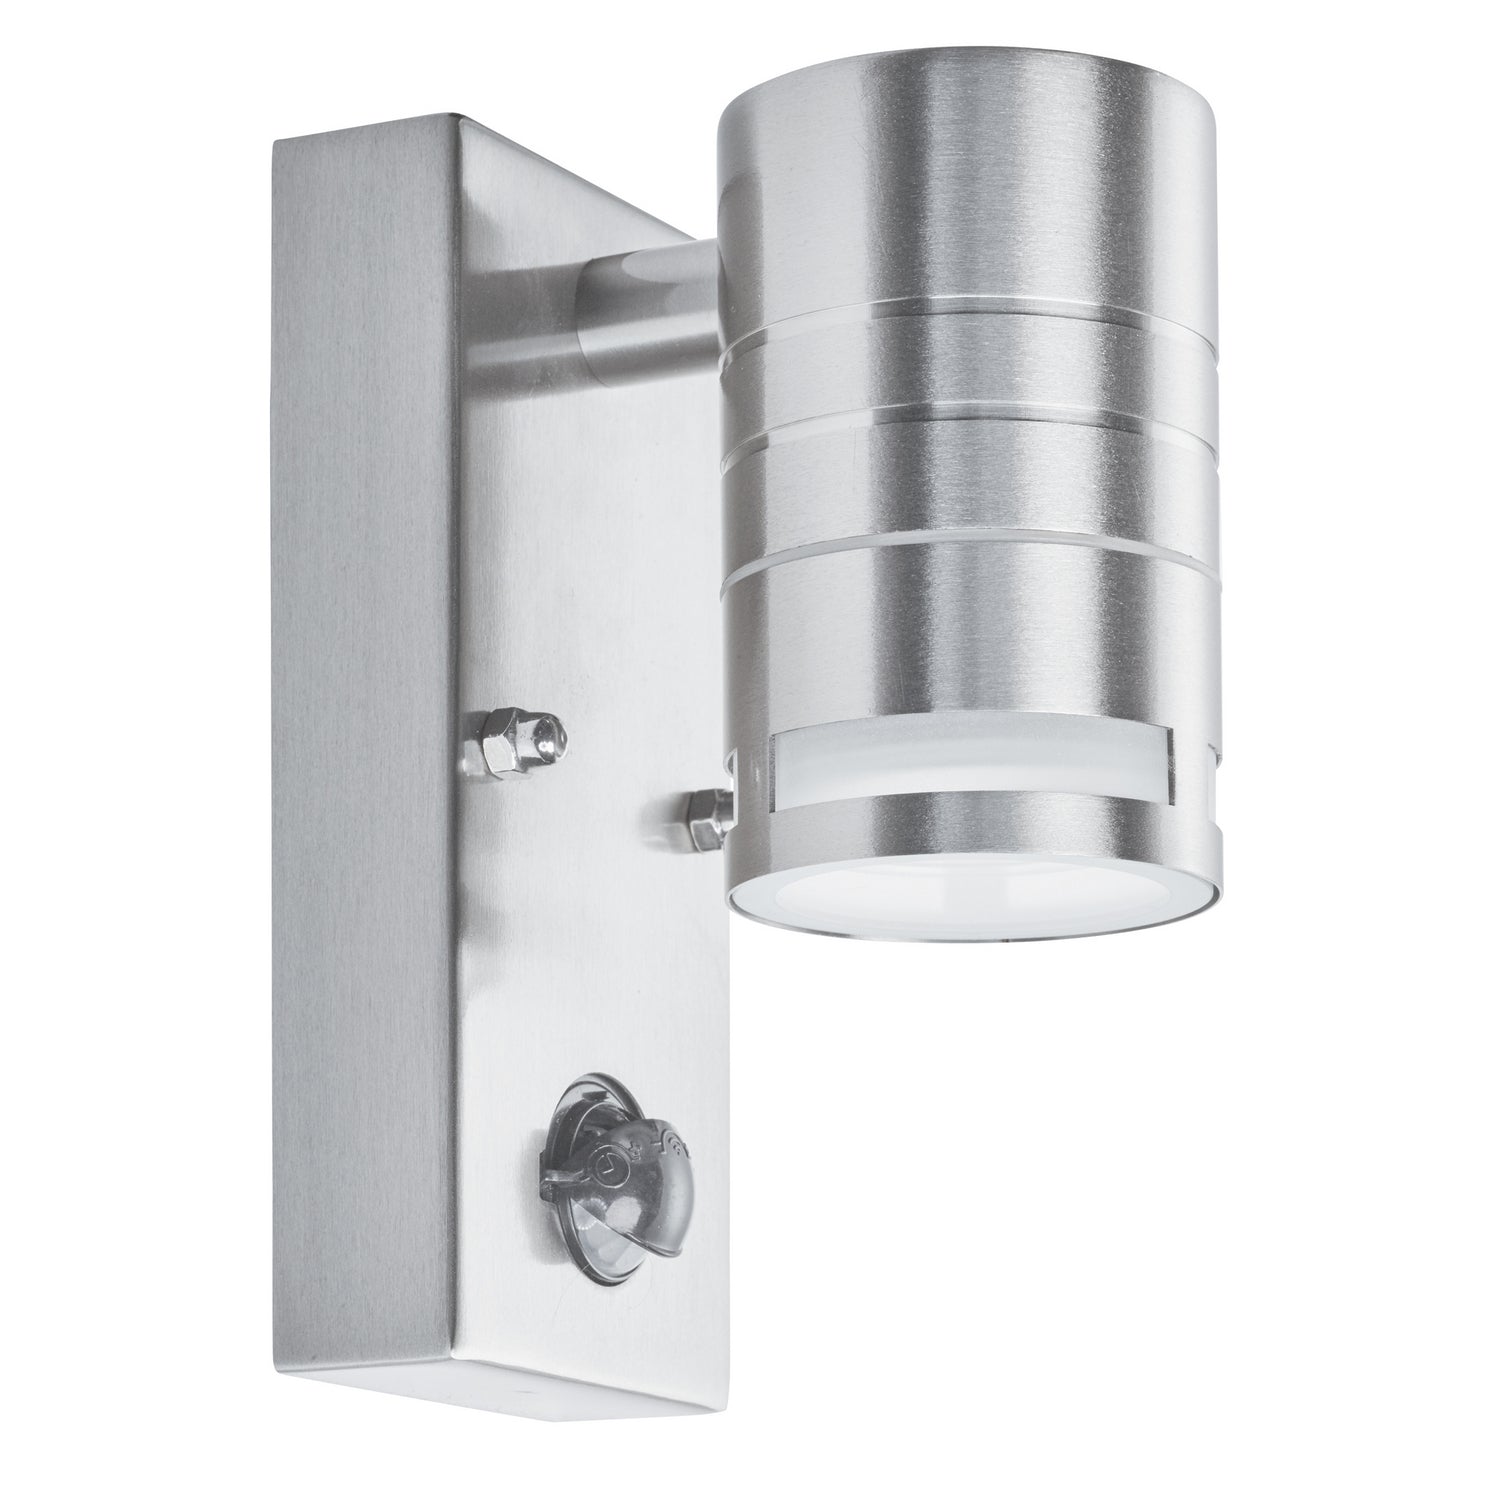 Metro LED Stainless Steel Outdoor Wall Light with PIR